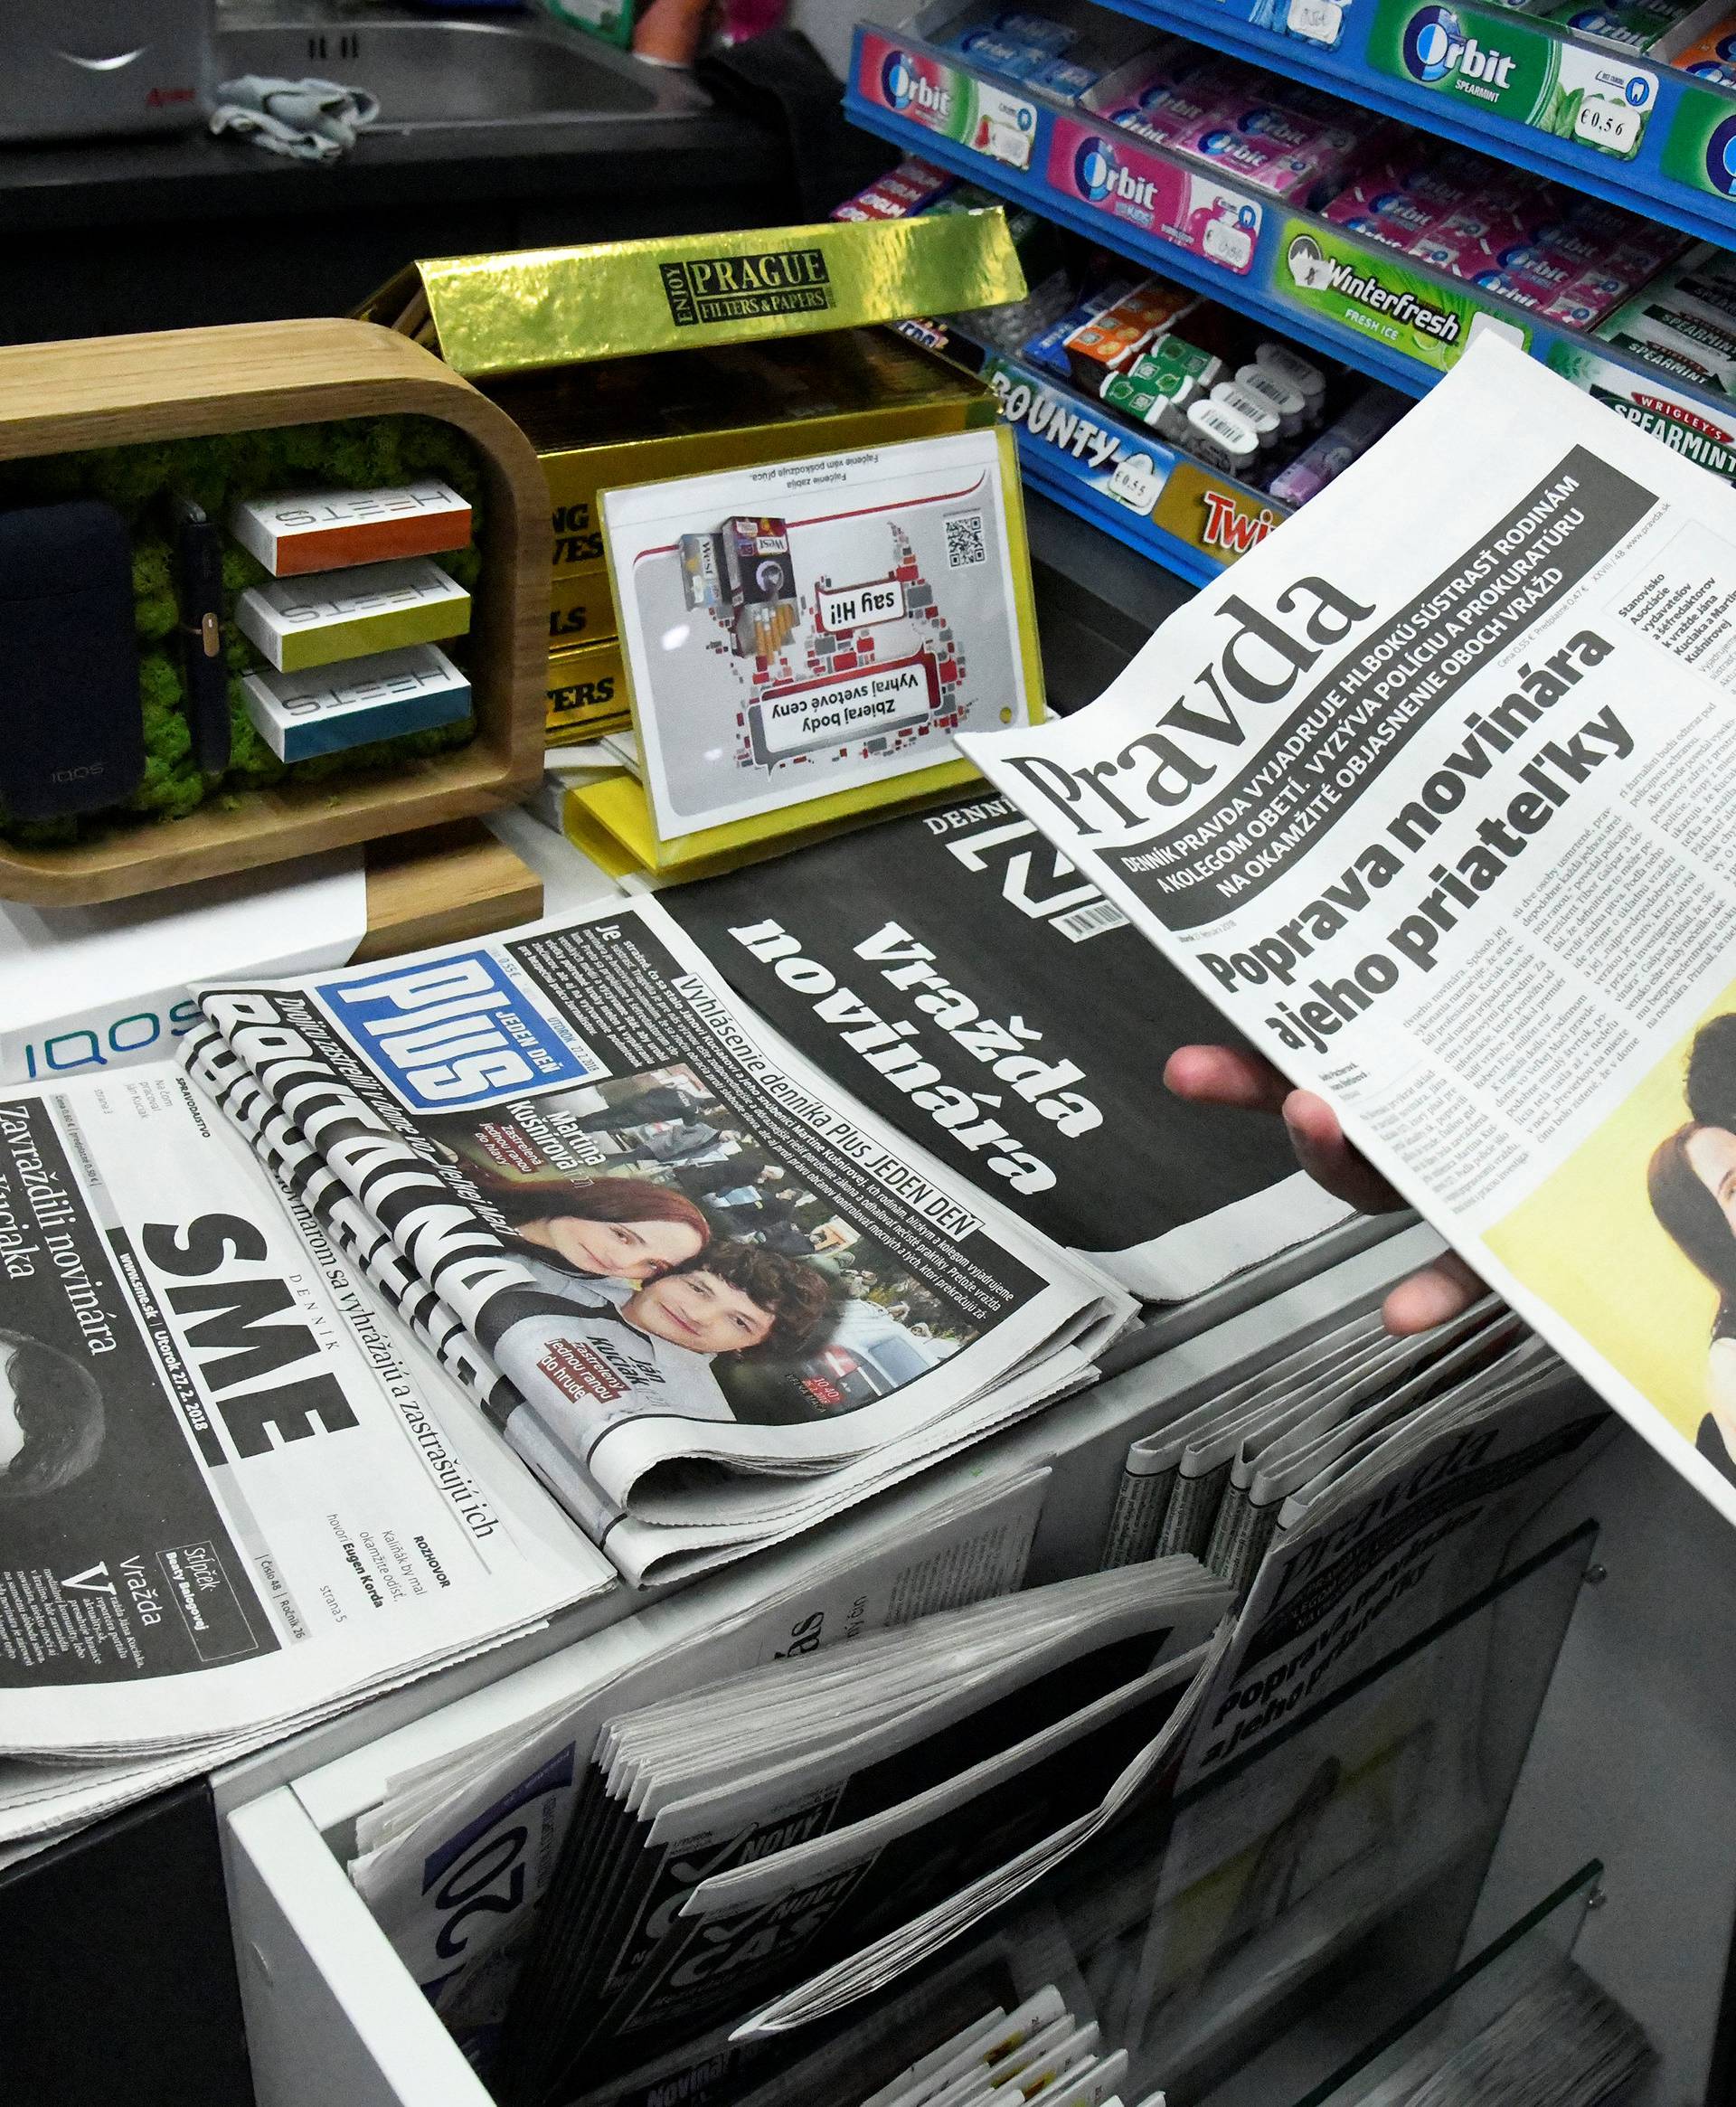 Front pages of Slovak newspapers are seen with headlines about and portraits of murdered Slovak investigative journalist Jan Kuciak and his girlfriend Martina Kusnirova, in a shop in Trnava